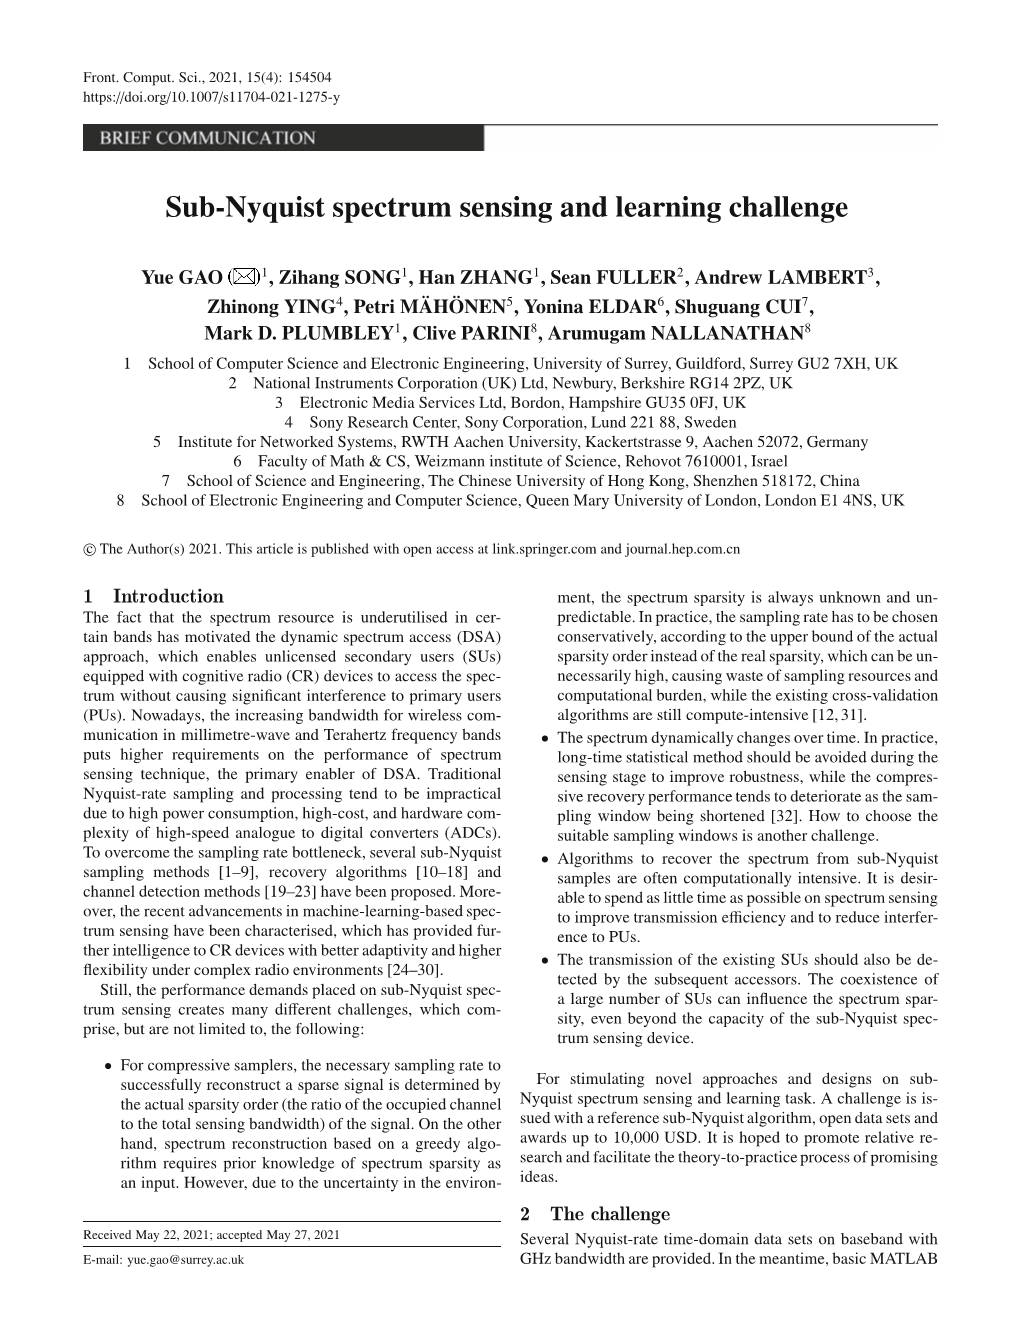 Sub-Nyquist Spectrum Sensing and Learning Challenge